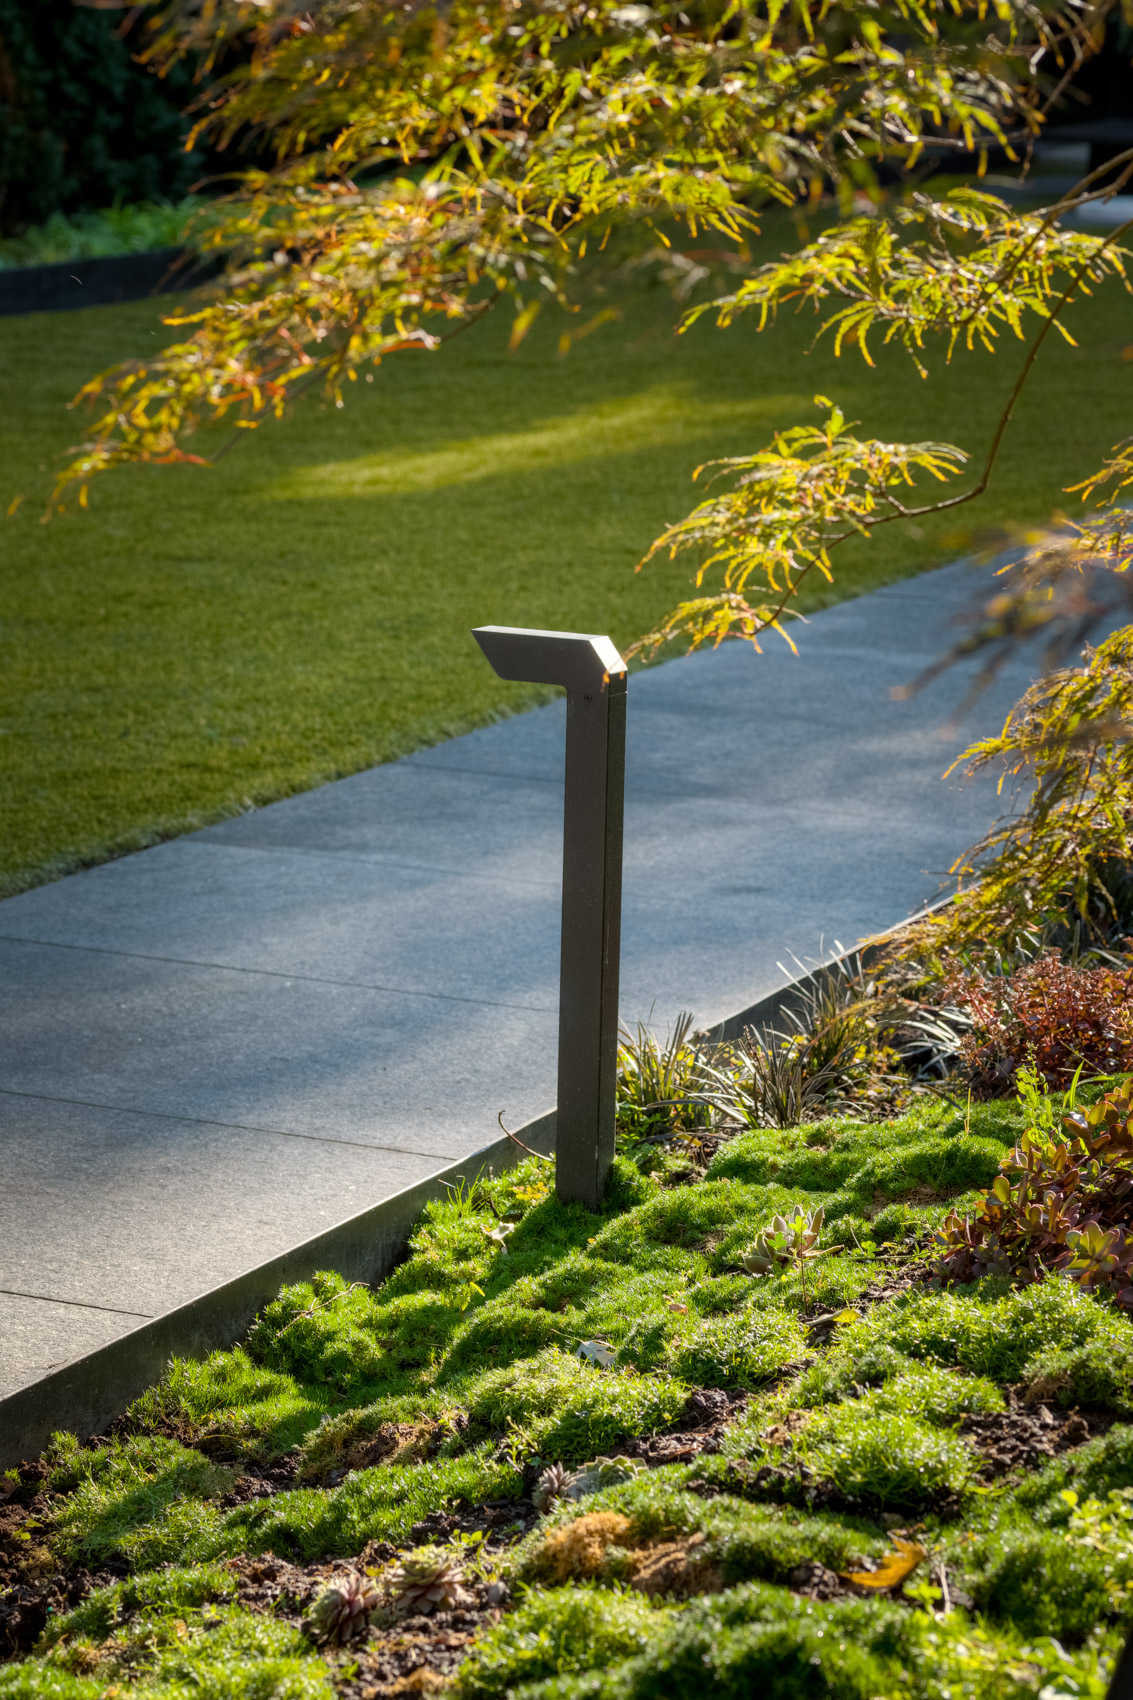 detail view of garden lighting in plantings next to path